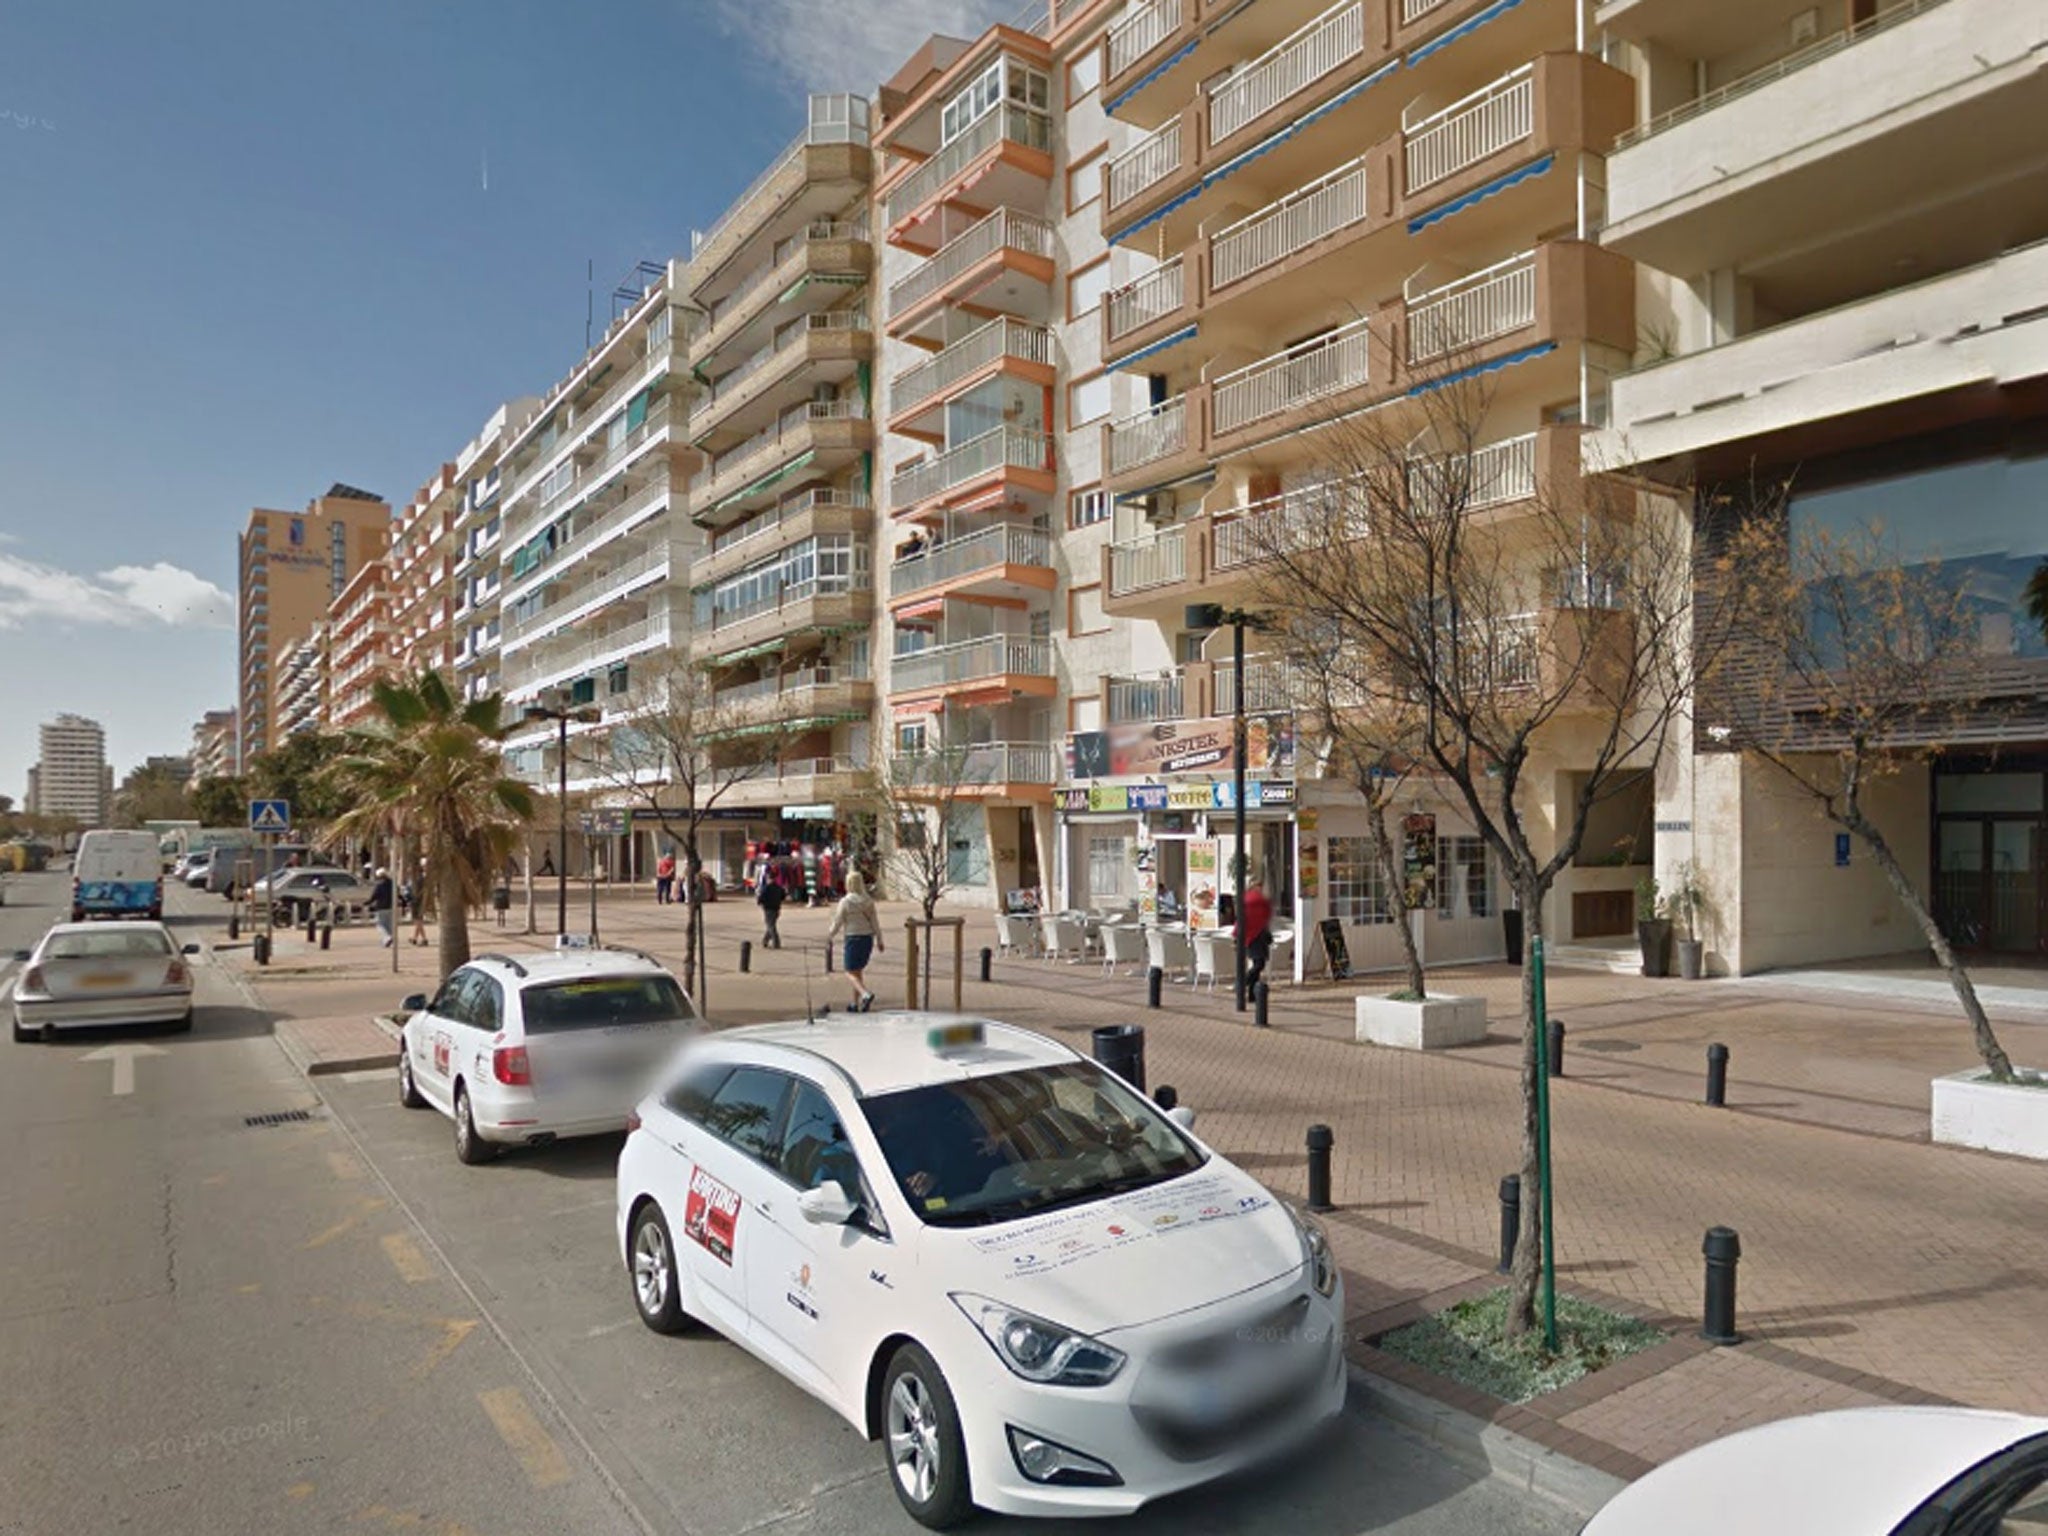 A woman has allegedly been beheaded by her brother in Fuengirola, Costa del Sol